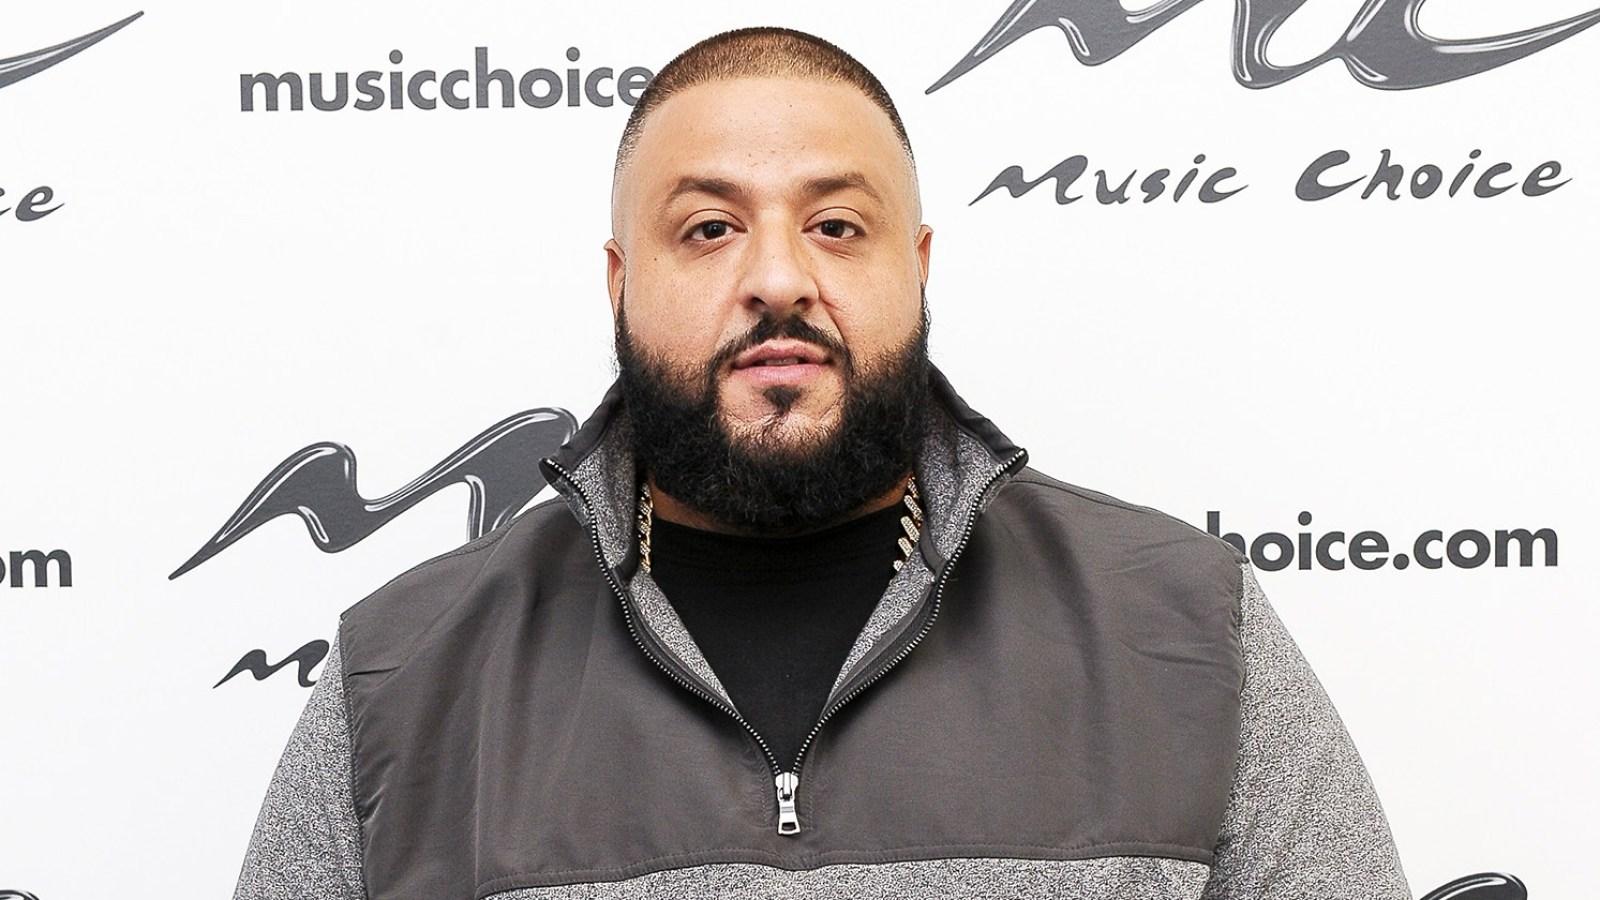 DJ Khaled: 25 Things You Don't Know About Me